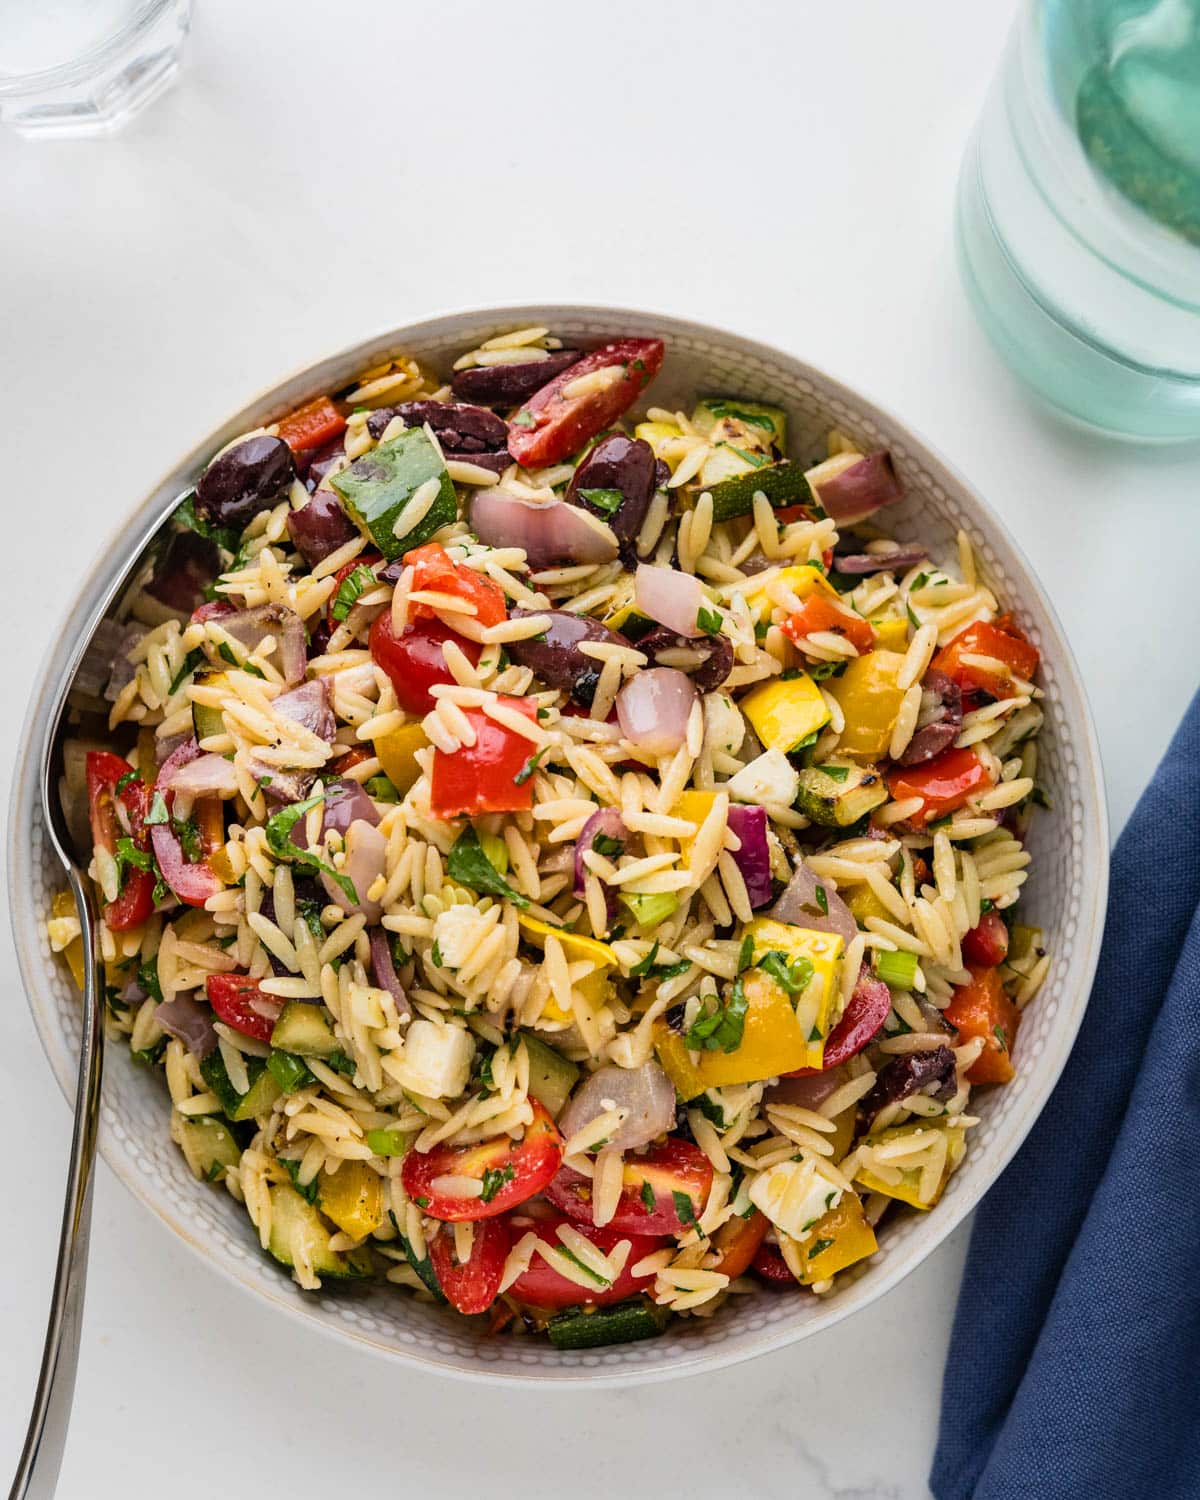 salad with orzo pasta and grilled and fresh vegetables.